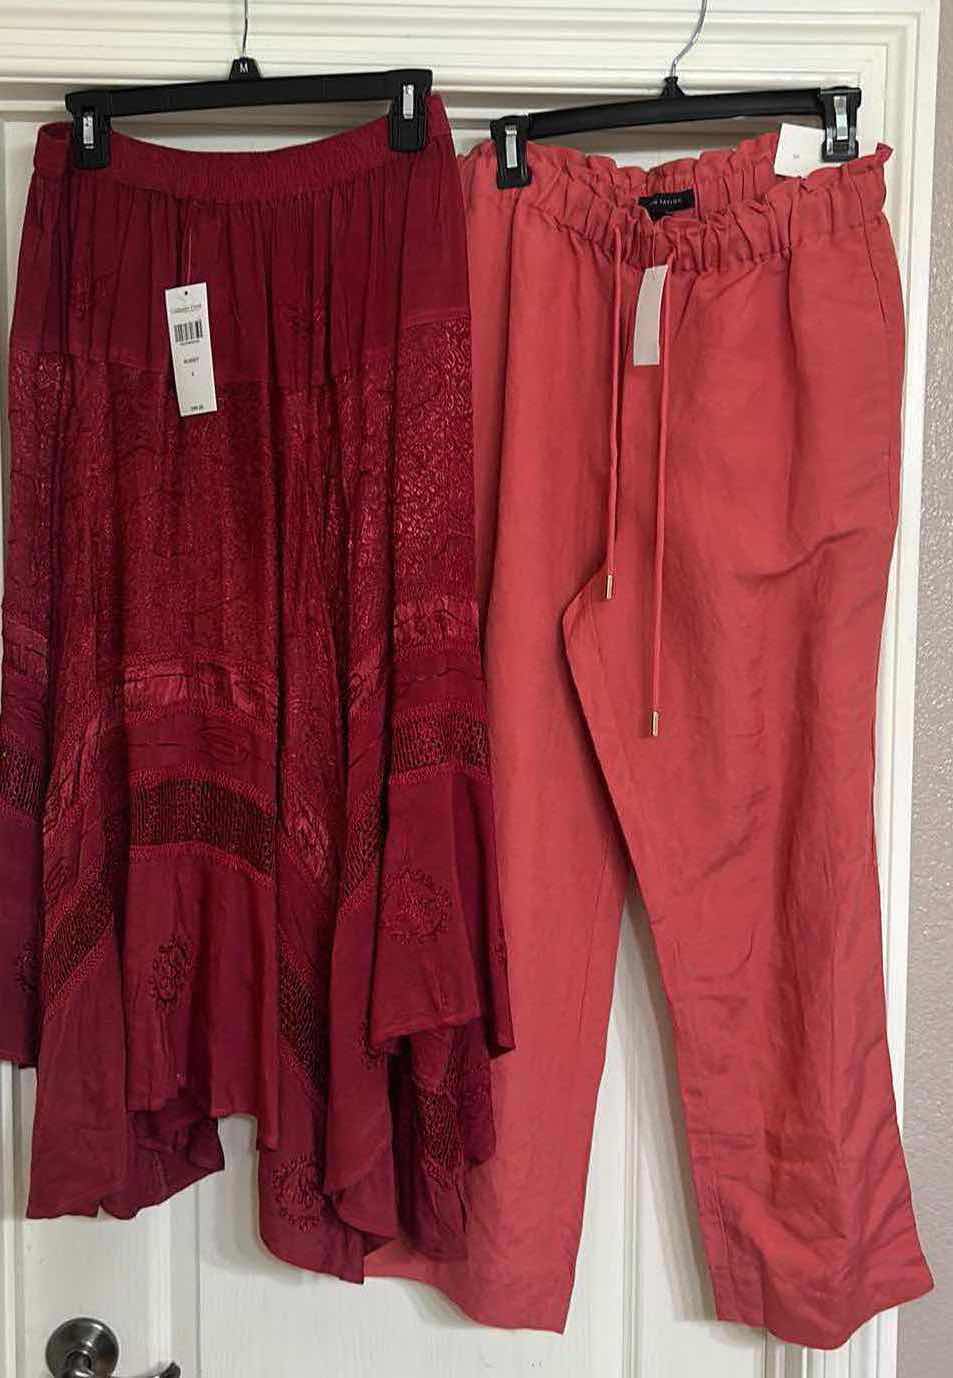 Photo 1 of 2 NWT WOMENSWEAR- COLDWATER CREEK SKIRT IN RUSSET SISE SM $100, ANN TAYLOR PANTS SIZE MED $70